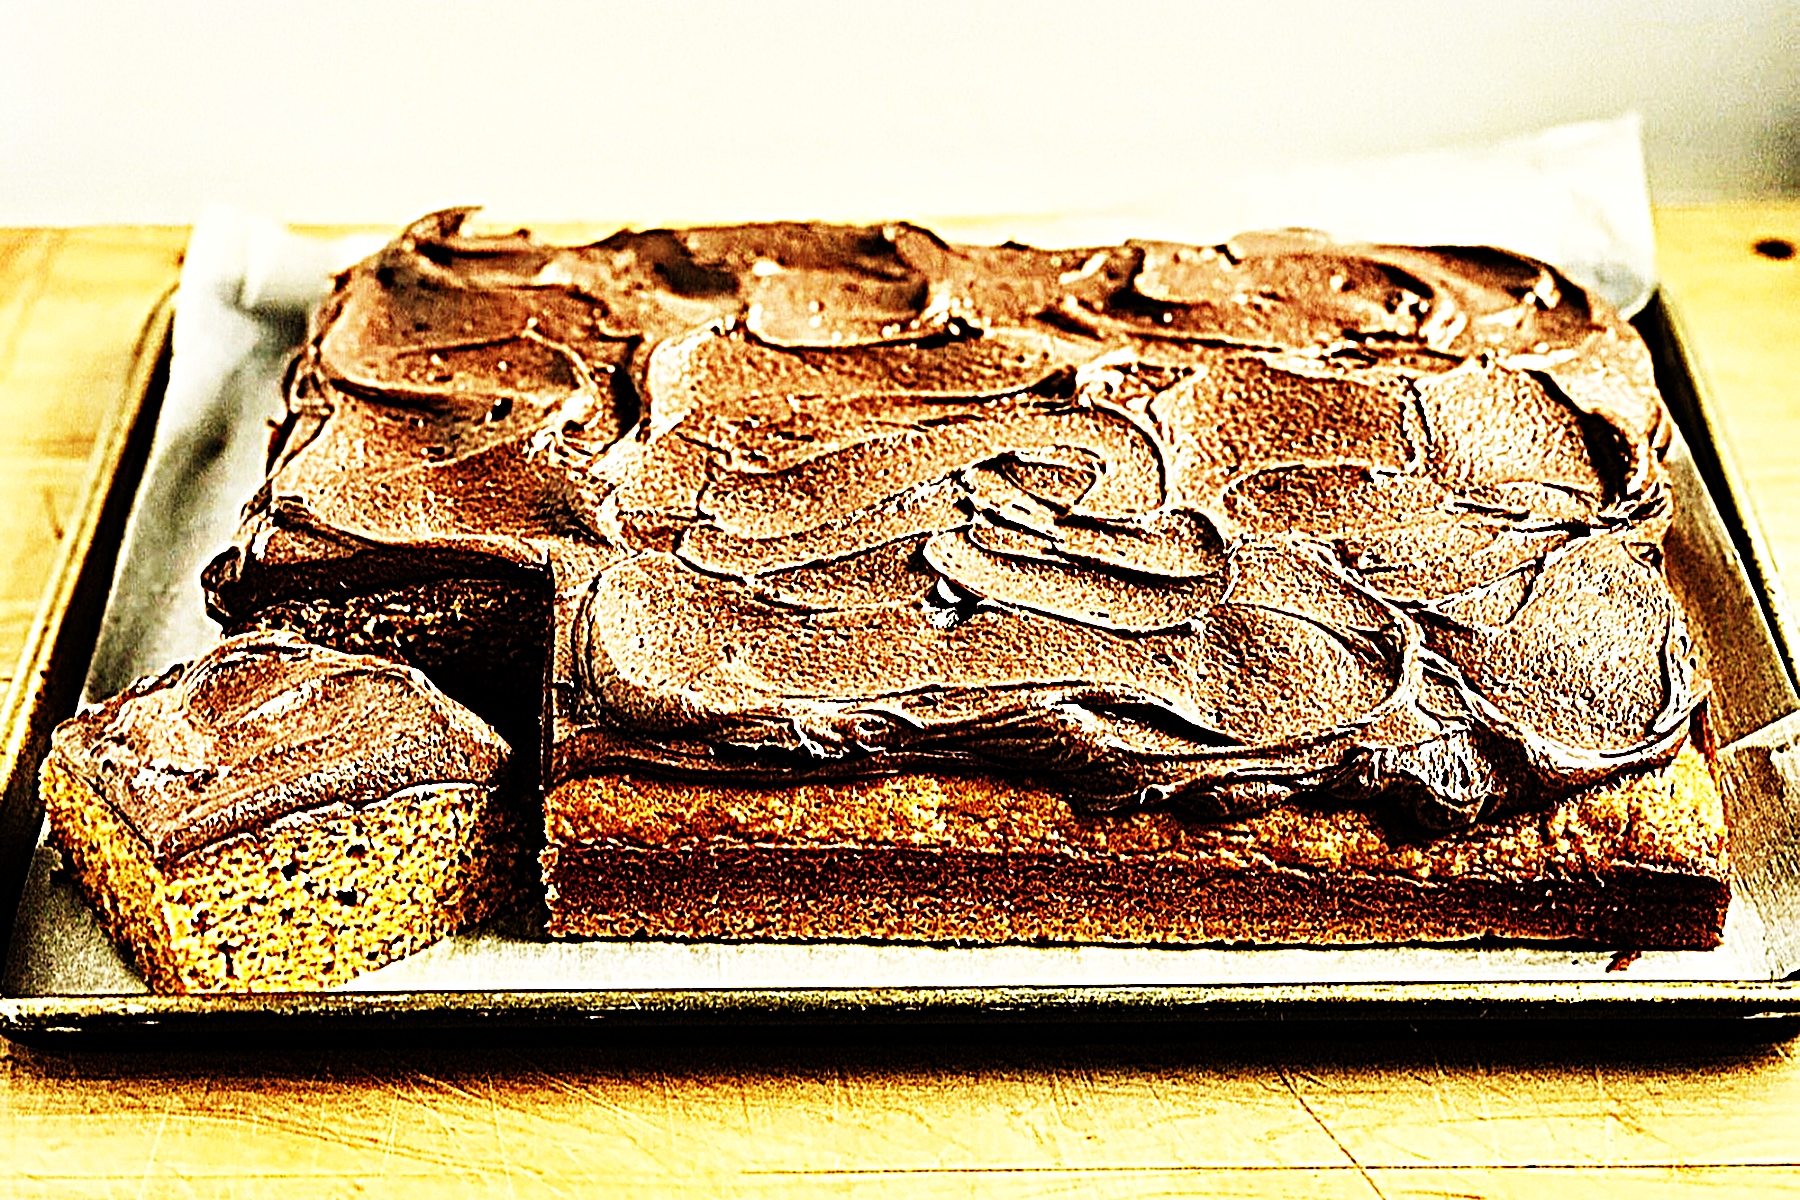 Stupid-Easy Recipe for One-Bowl Pumpkin Sheet Cake with Chocolate Bourbon Buttercream (#1 Top-Rated)